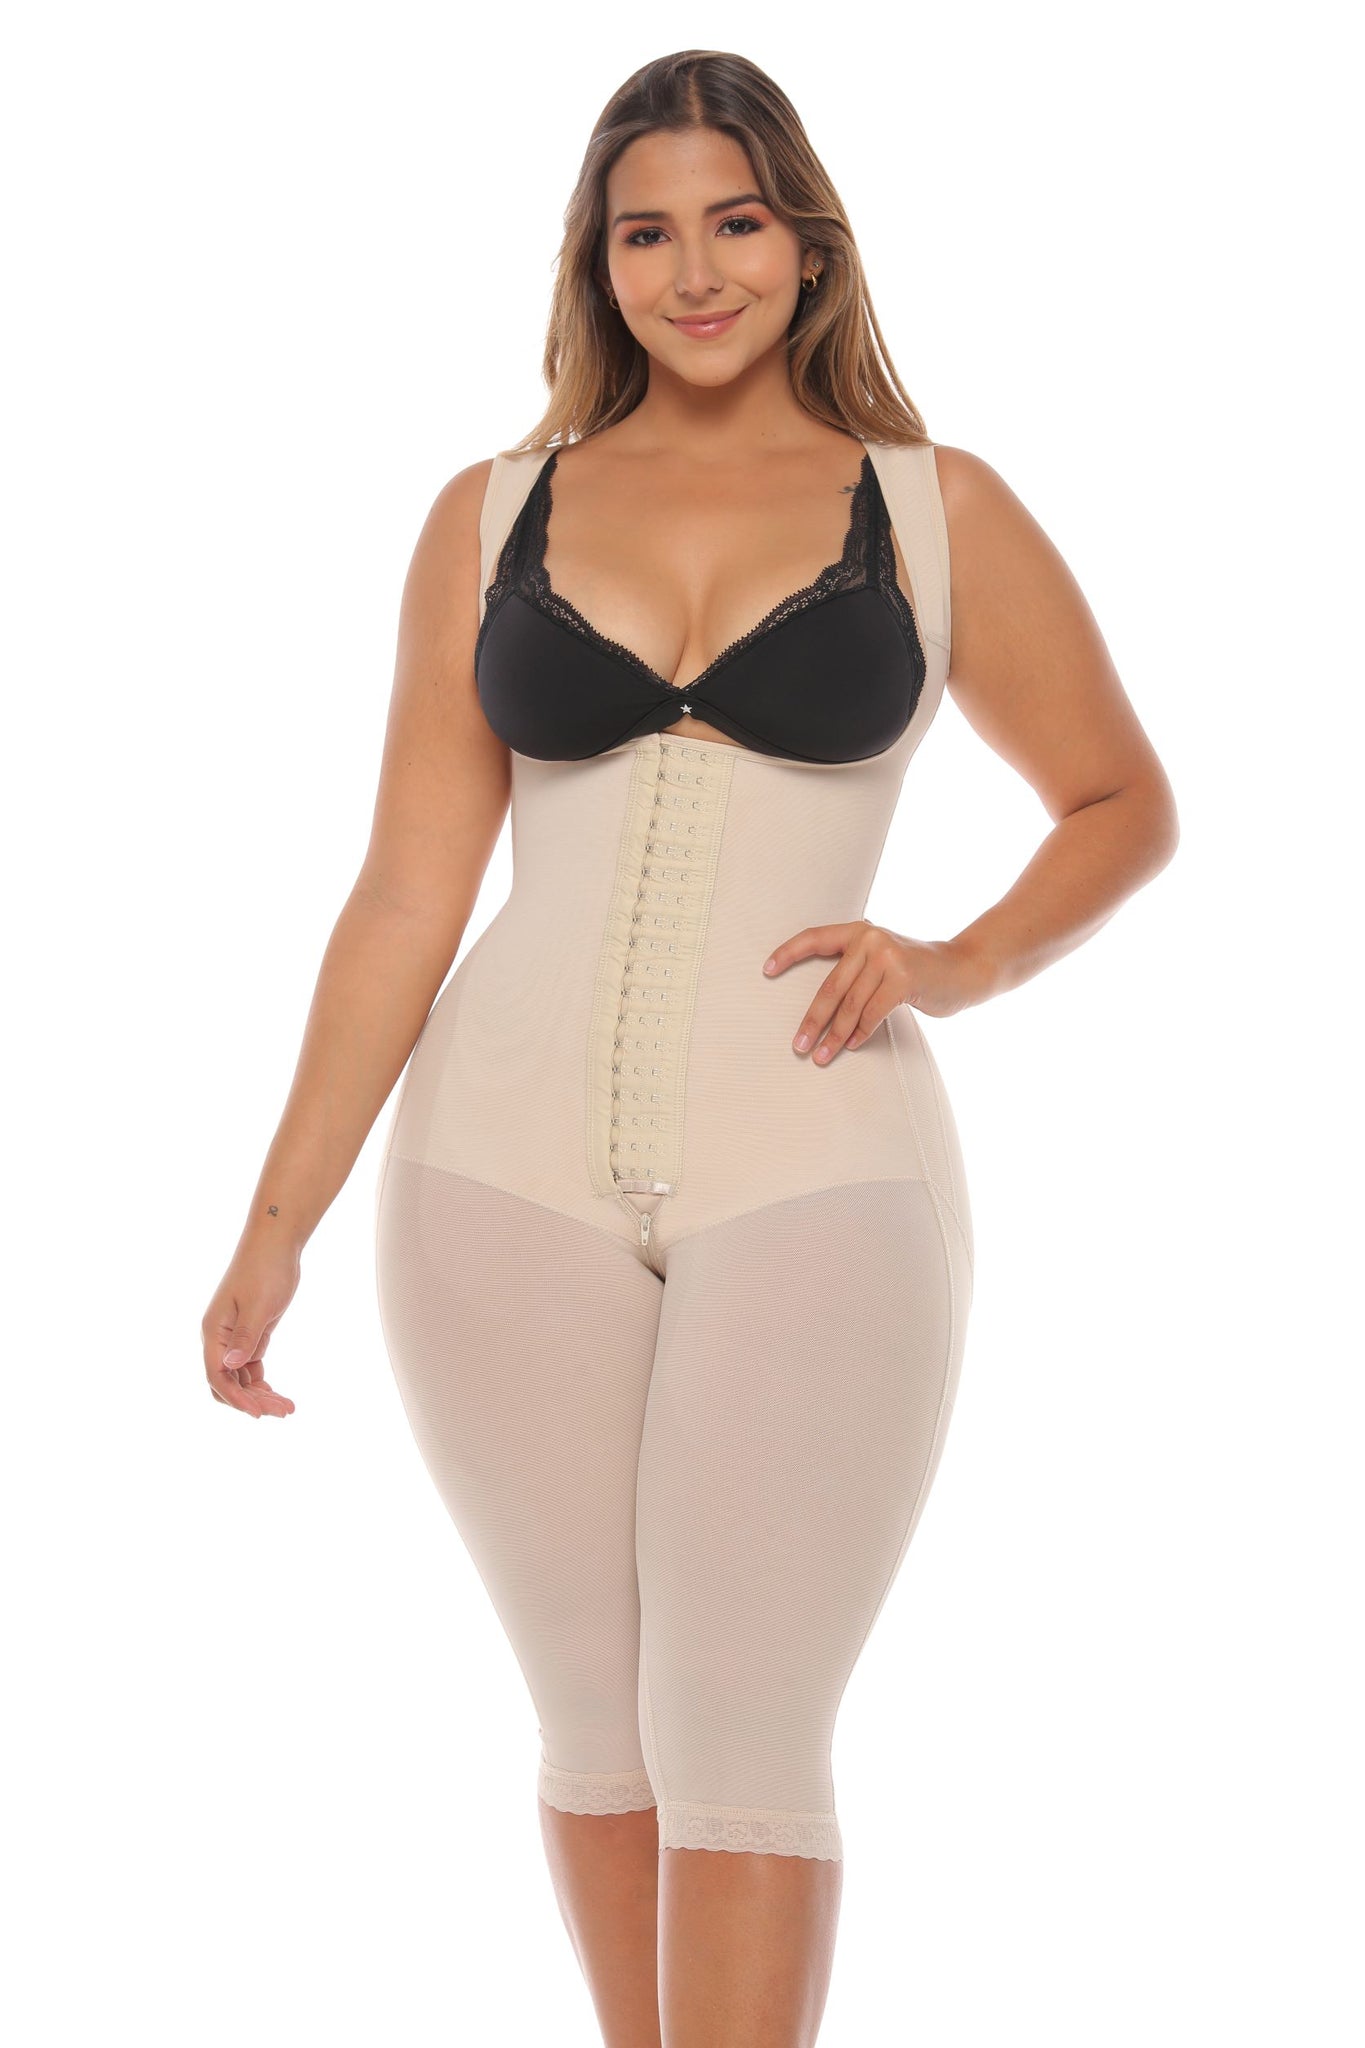 Hourglass Butt Lifter Shapewear BBL Knee Length Tummy Control V-Drive 7083 Bcurved - BCURVED